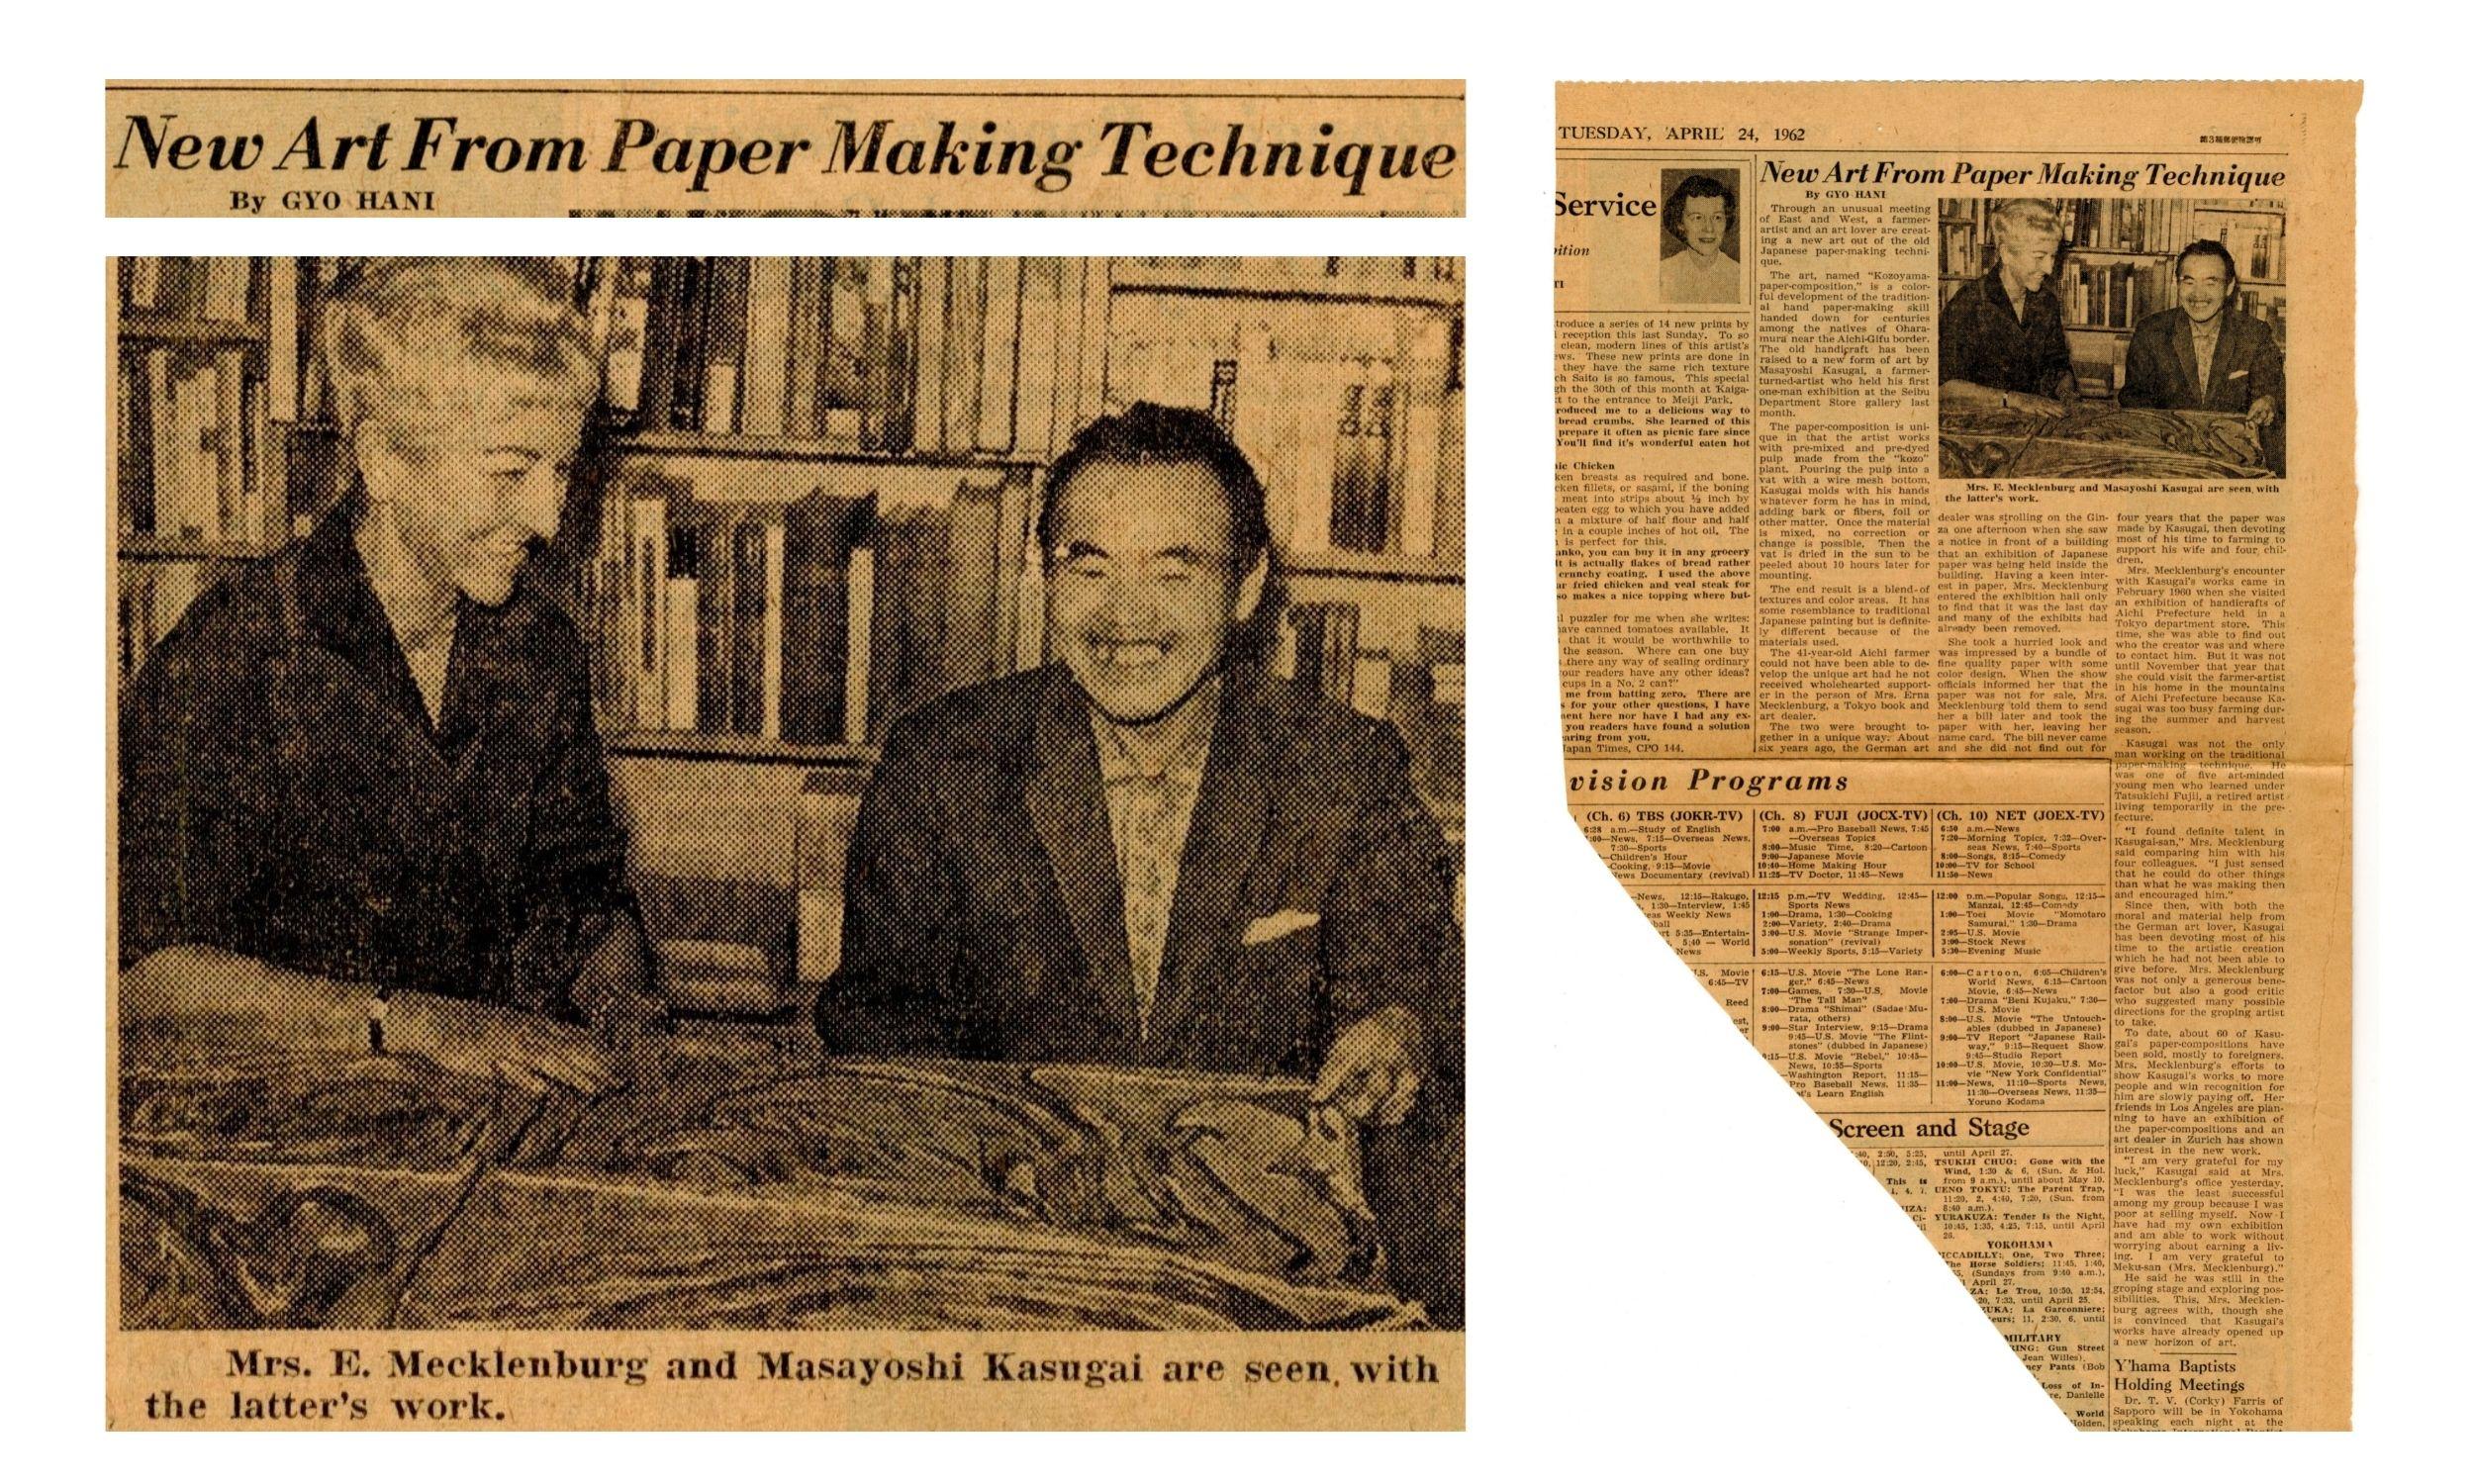 Newspaper clipping titled "New Art From Paper Making Technique" with a photo of a man and woman looking at a large piece of marbled paper